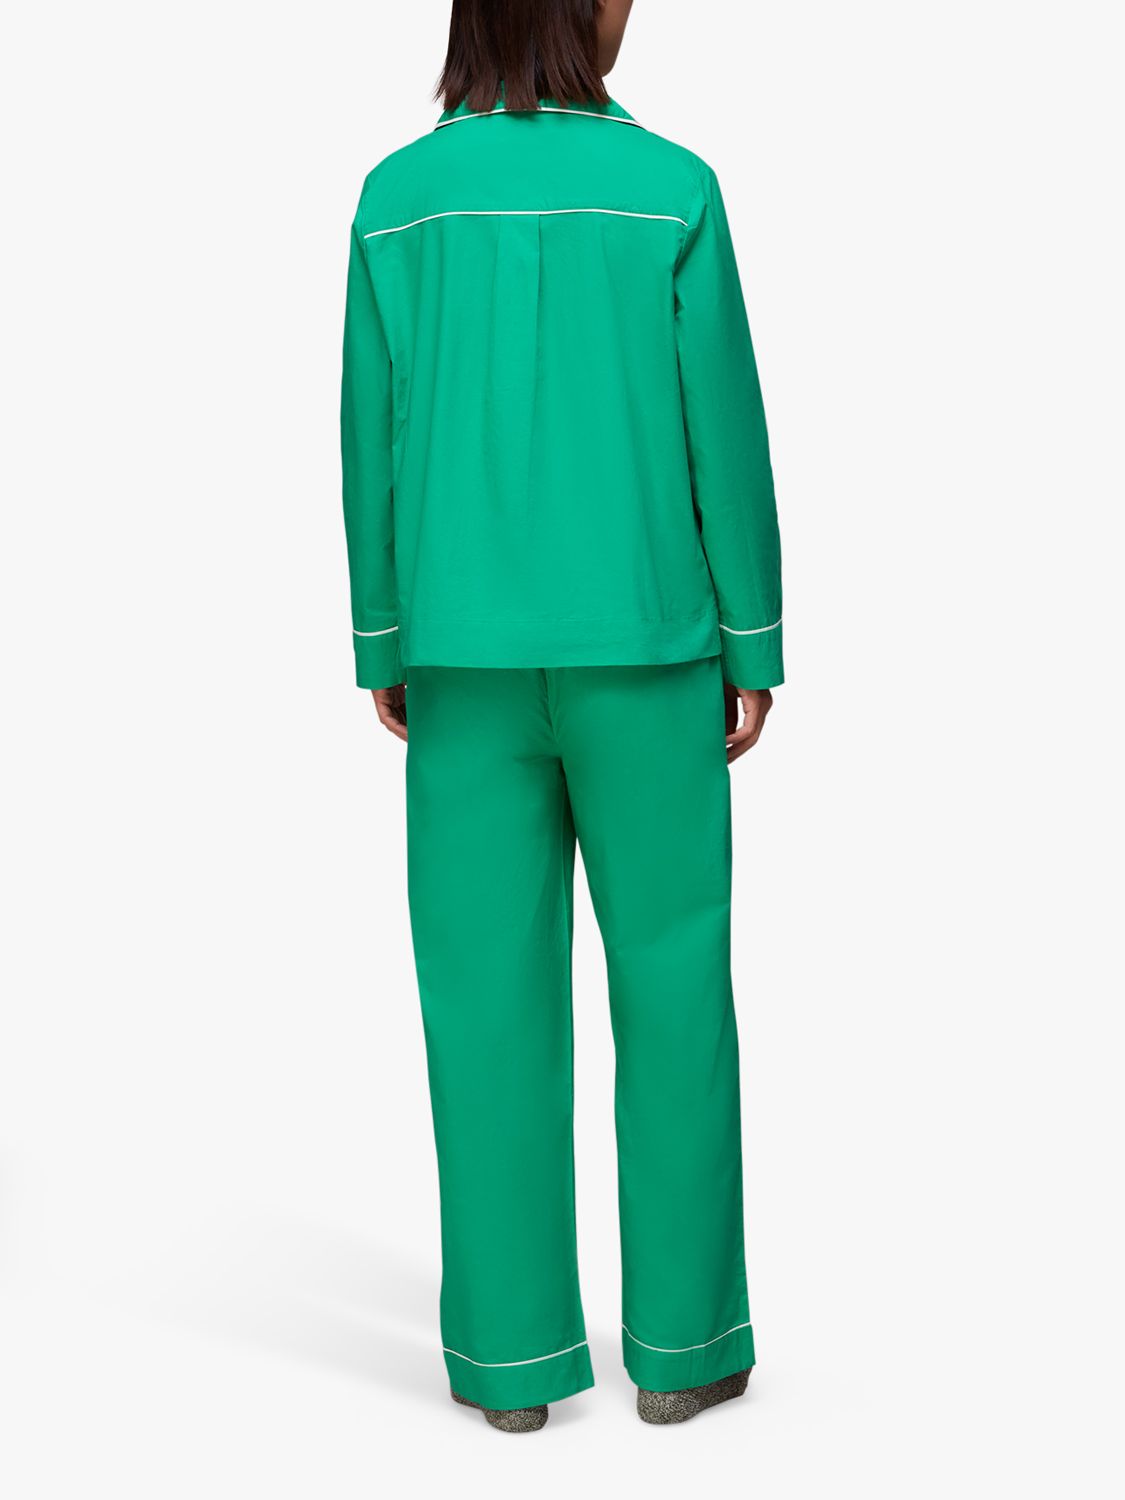 Buy Whistles Contrast Piping Cotton Pyjamas Online at johnlewis.com